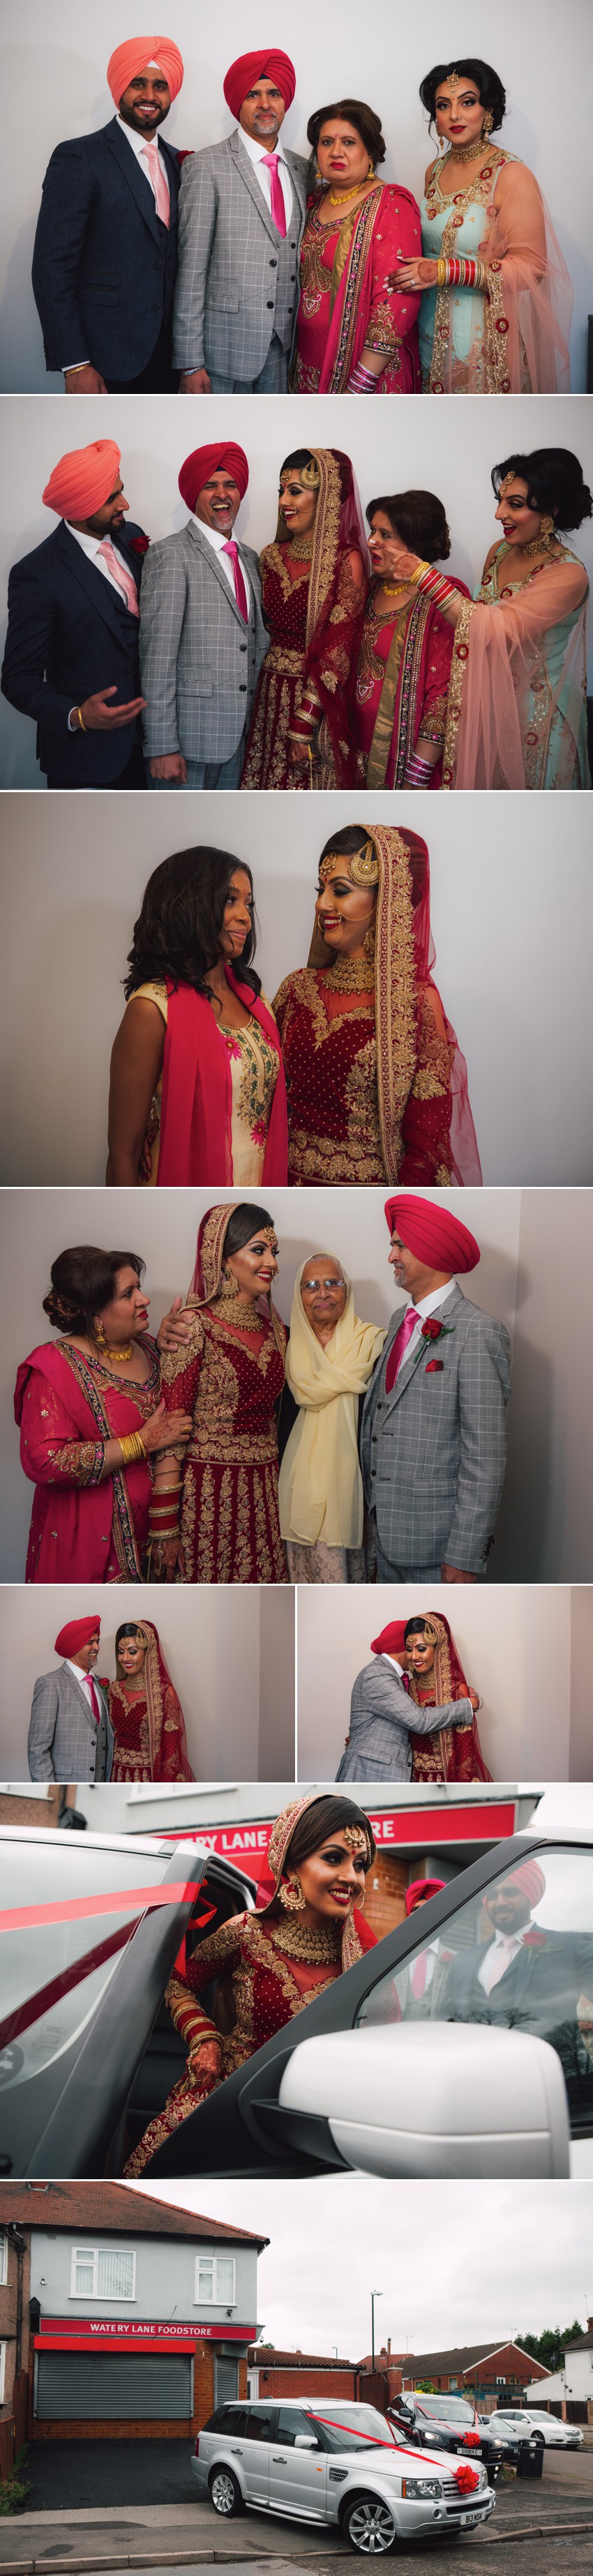 Sikh Wedding photography at Heart of England 2 1